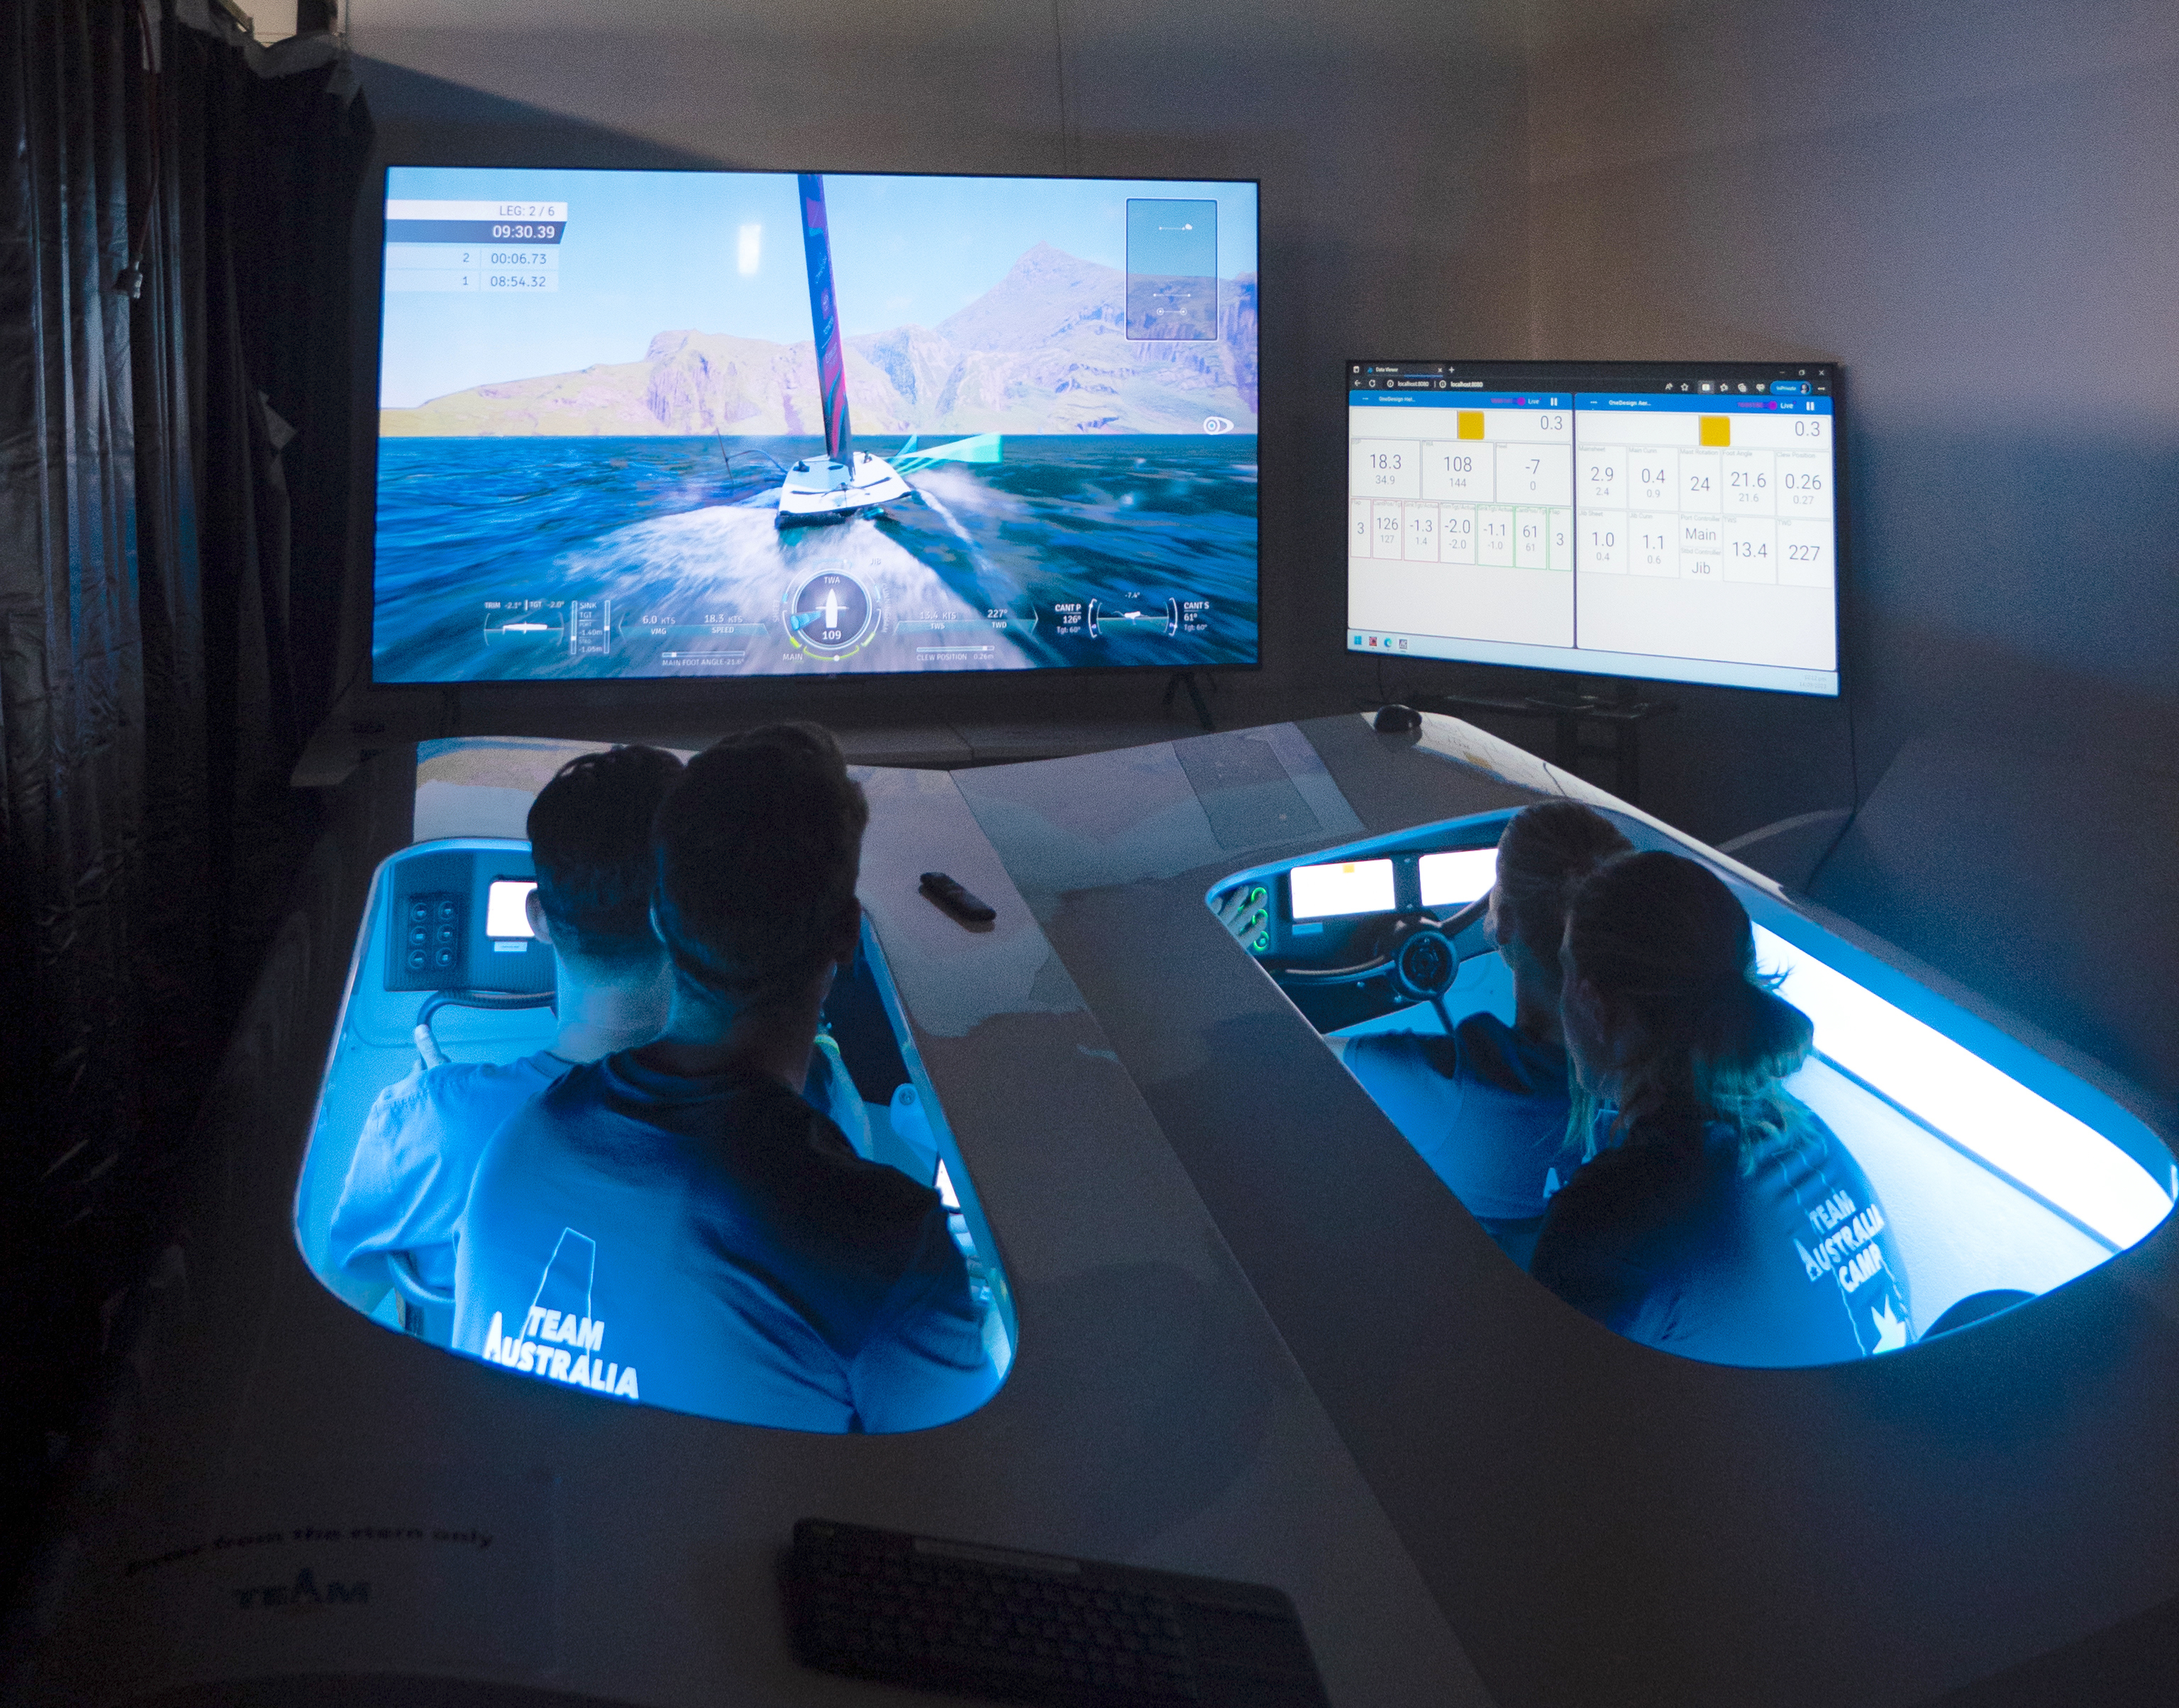 America's Cup: Age of the Simulator